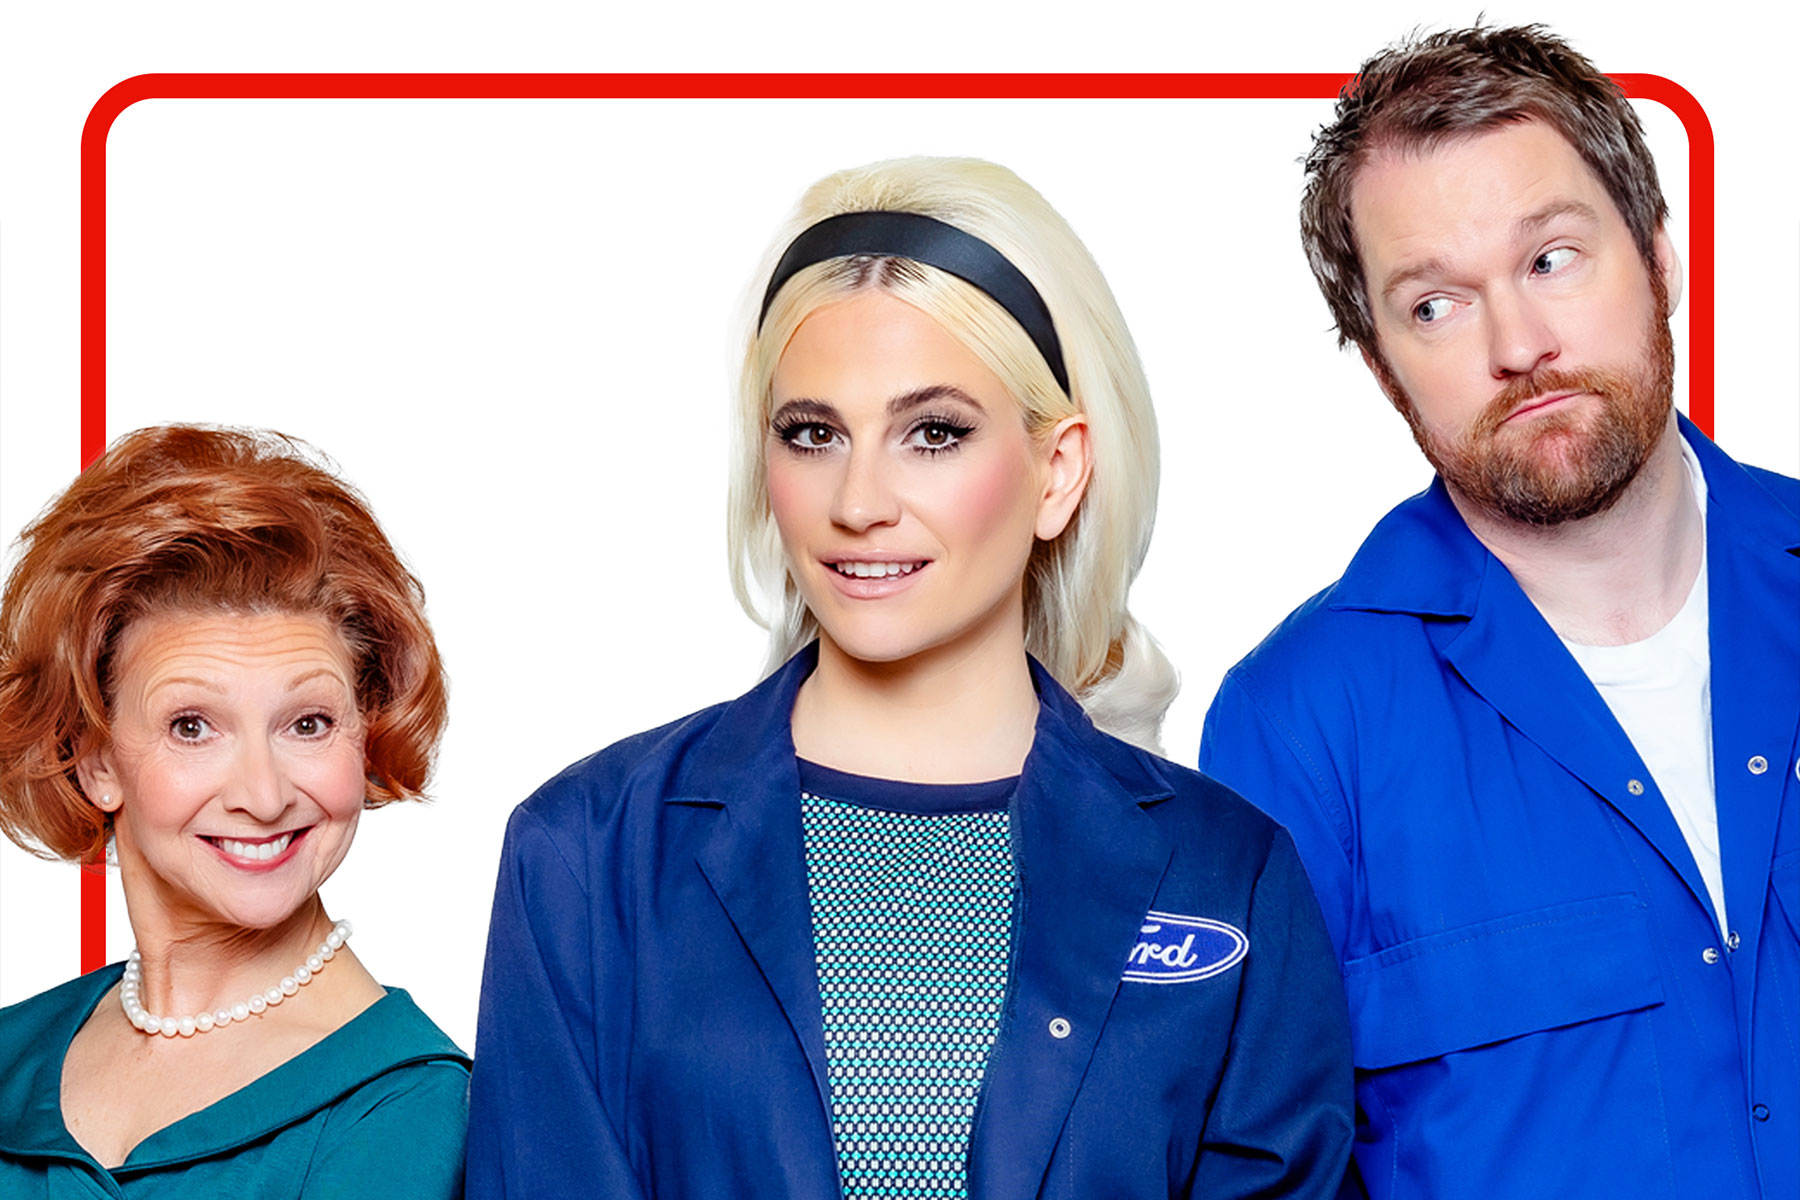 Bonnie Langford, Pixie Lott and Killian Donnelly in a promotional image for Made in Dagenham